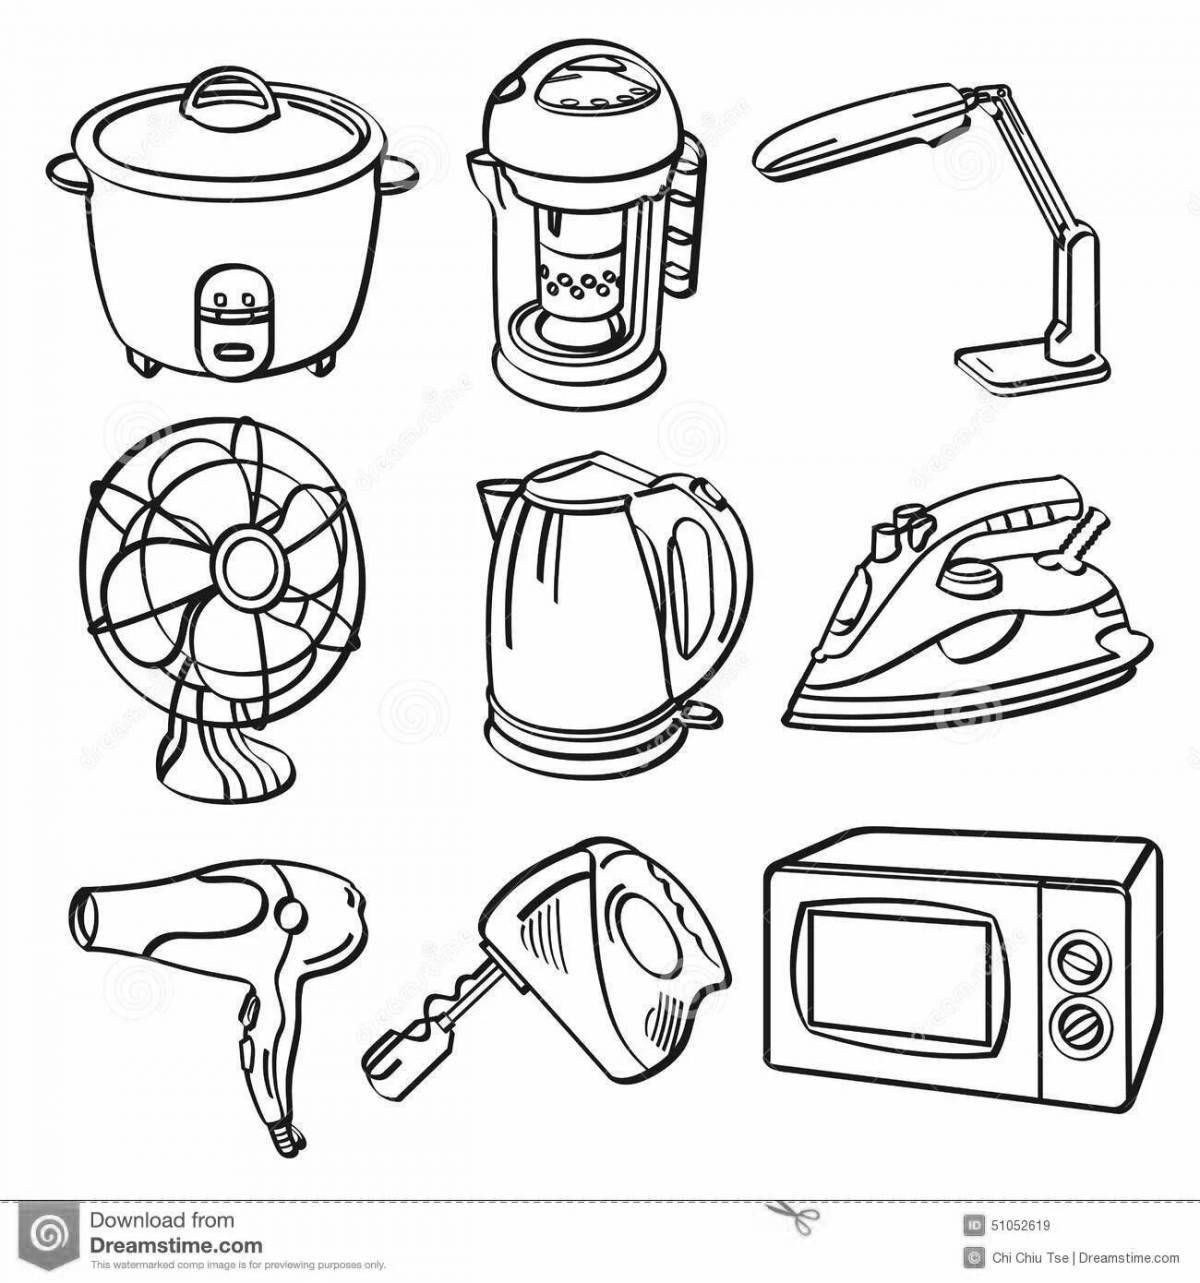 Coloring book for decorative electrical devices